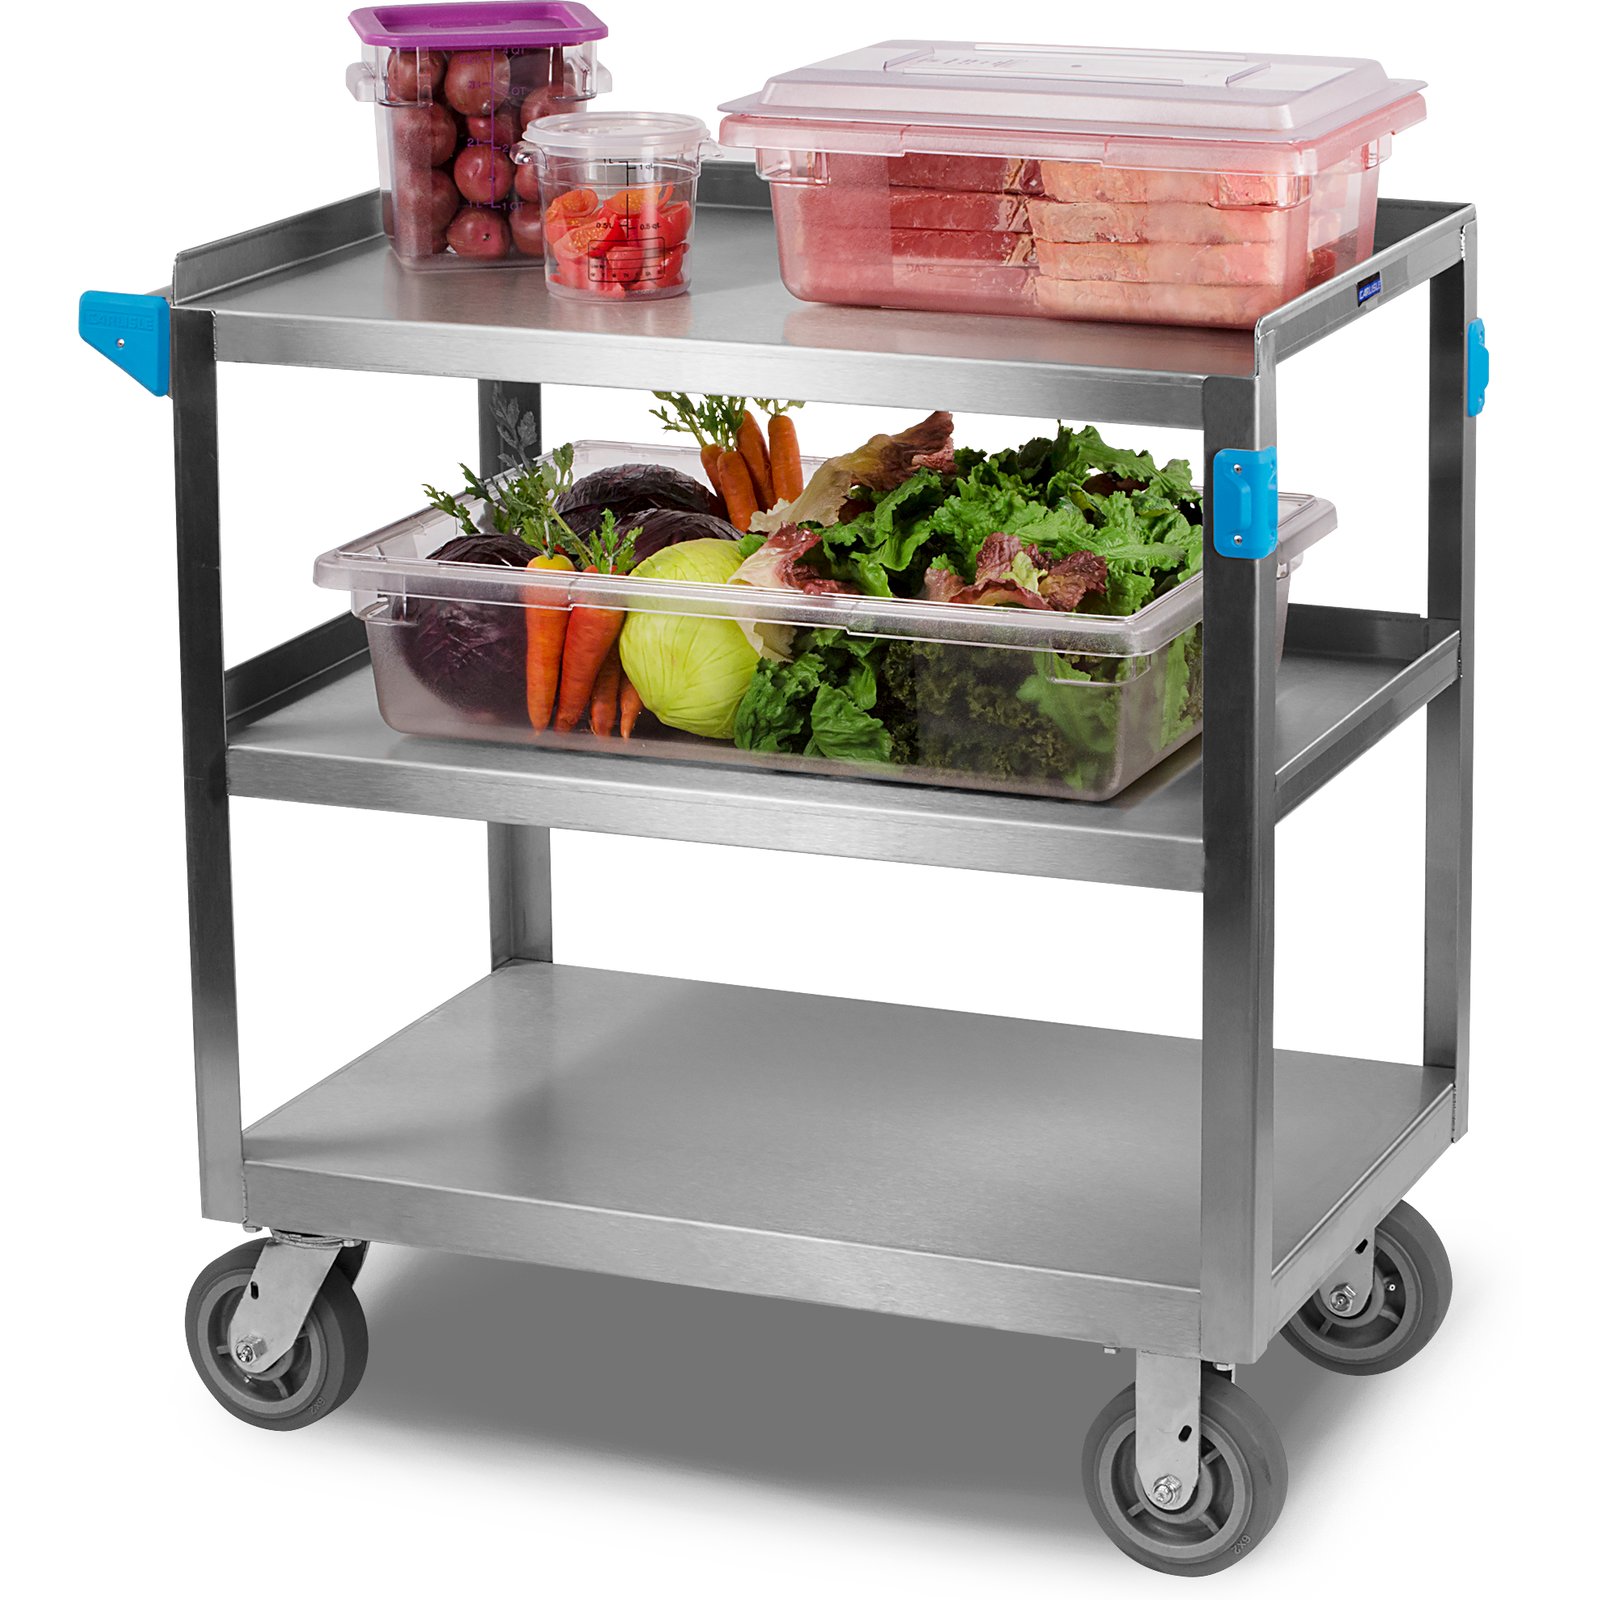 Stainless Steel Utility Carts – Coulmed Products